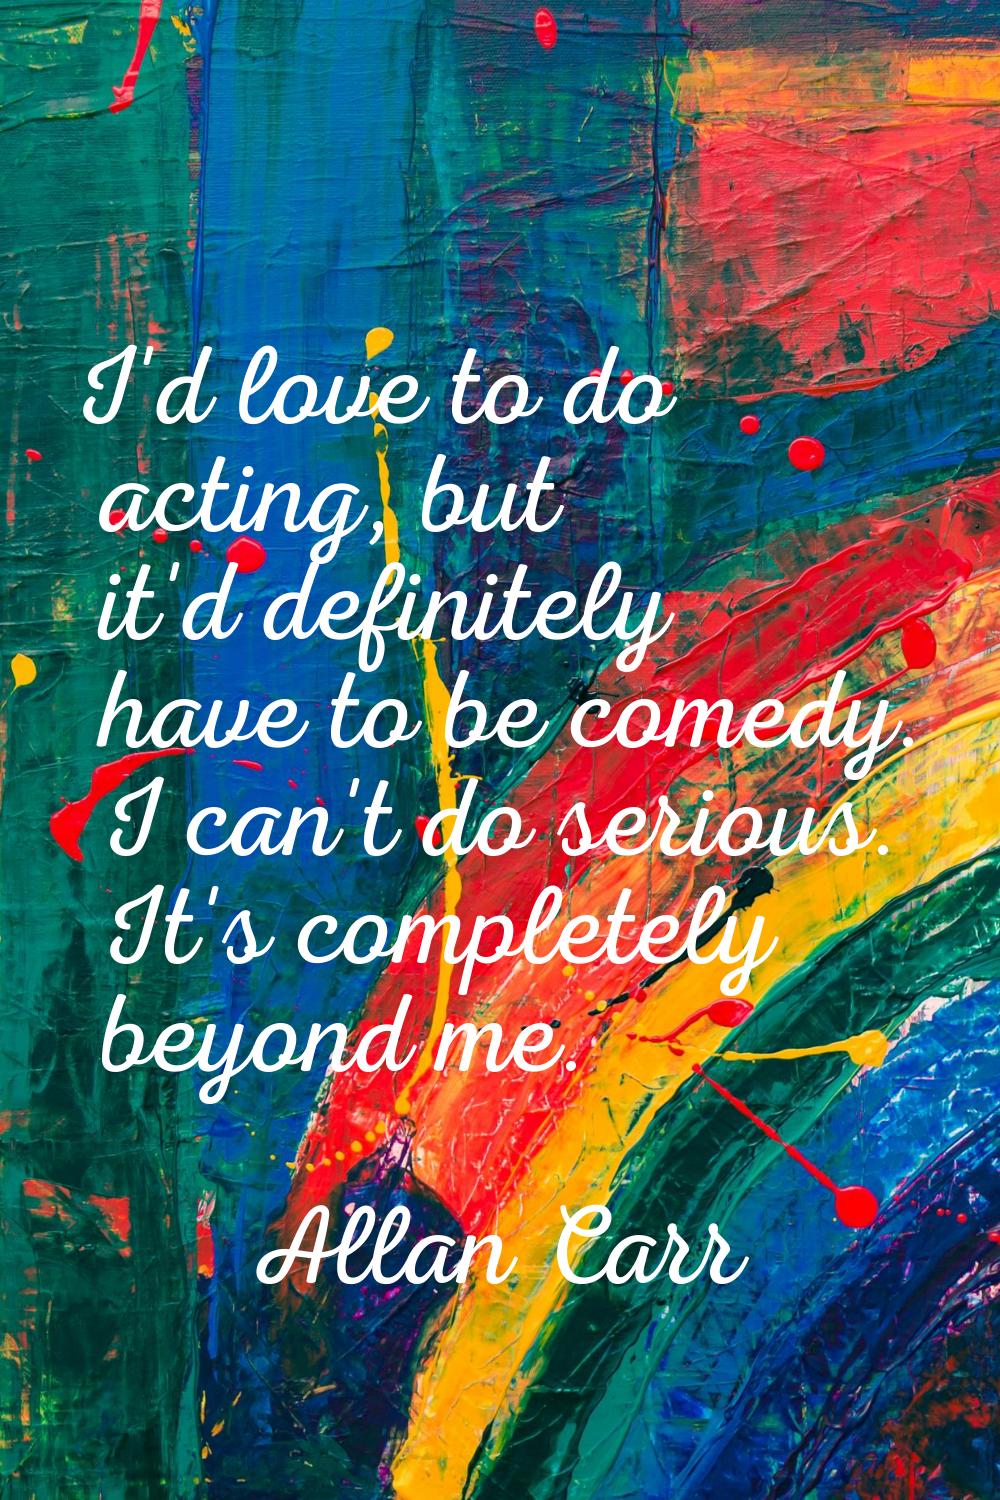 I'd love to do acting, but it'd definitely have to be comedy. I can't do serious. It's completely b